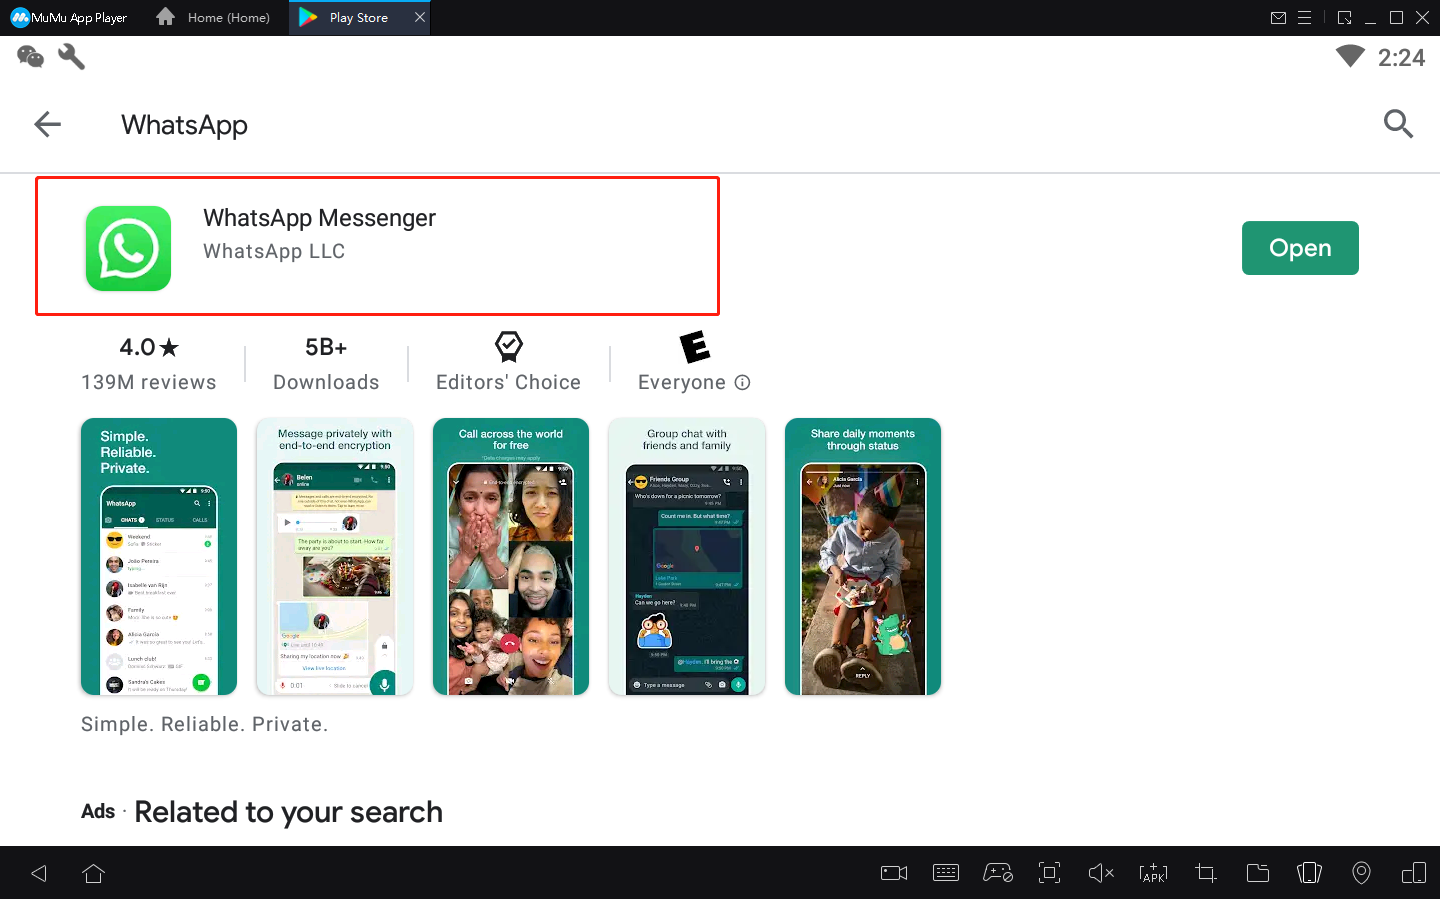 How to log in to WhatsApp with MuMu Player on PC2